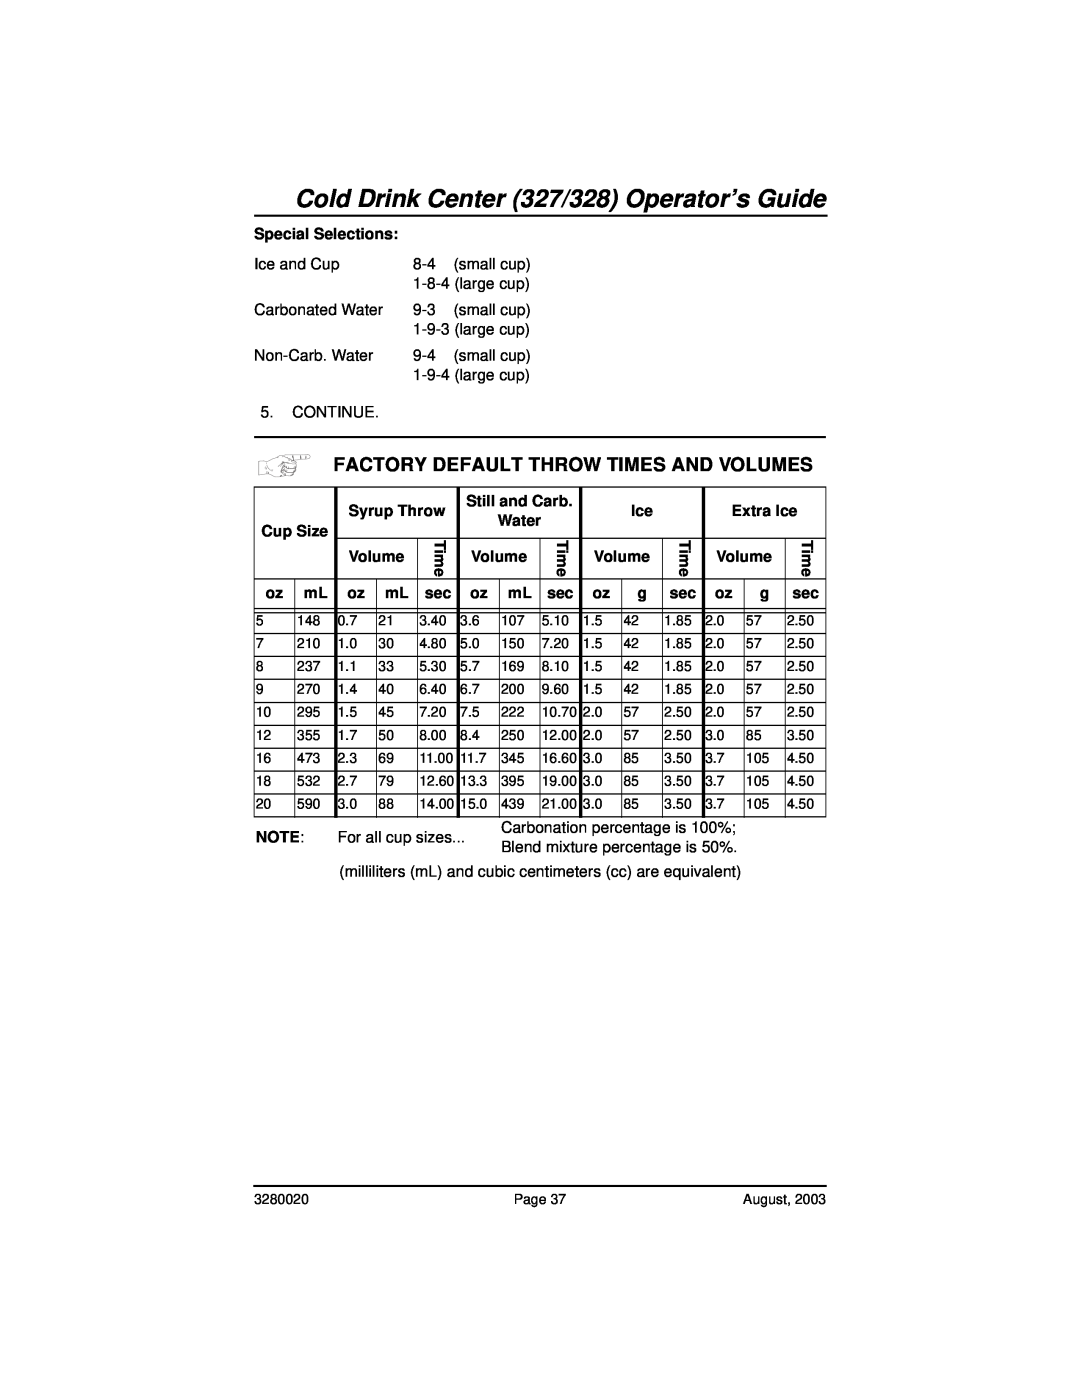 Everpure 325 manual Cold Drink Center 327/328 Operator’s Guide, Factory Default Throw Times And Volumes 